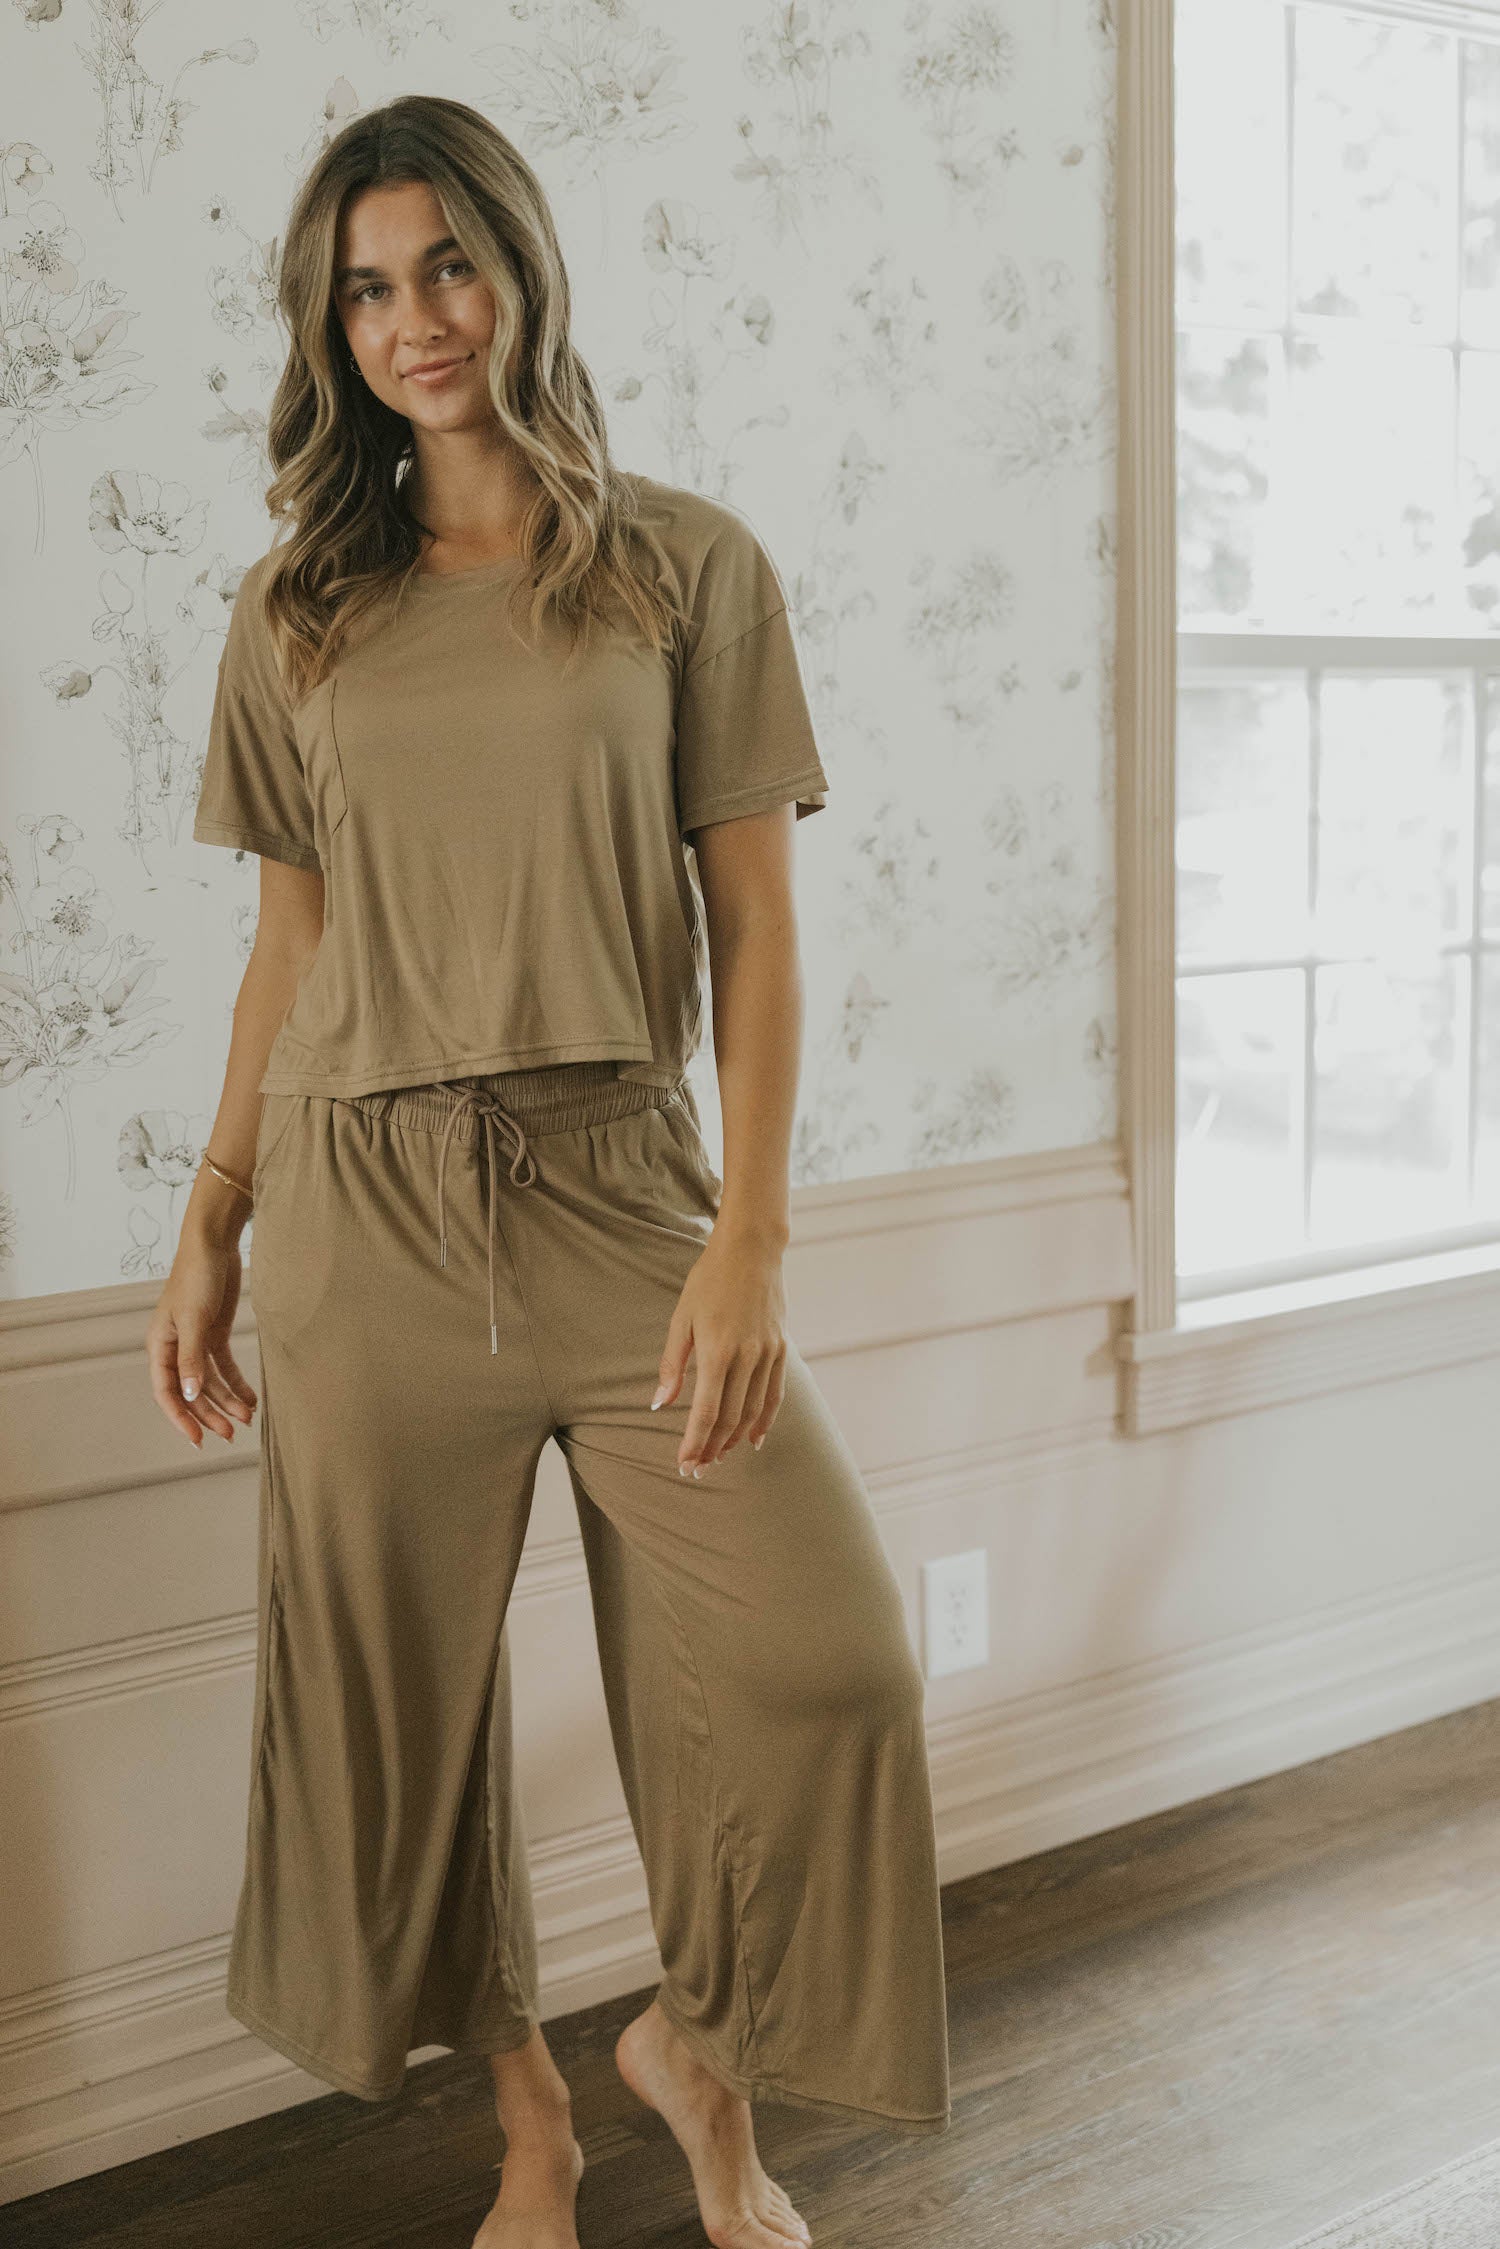 Stretchy and adjustable brown pajama pant for women.